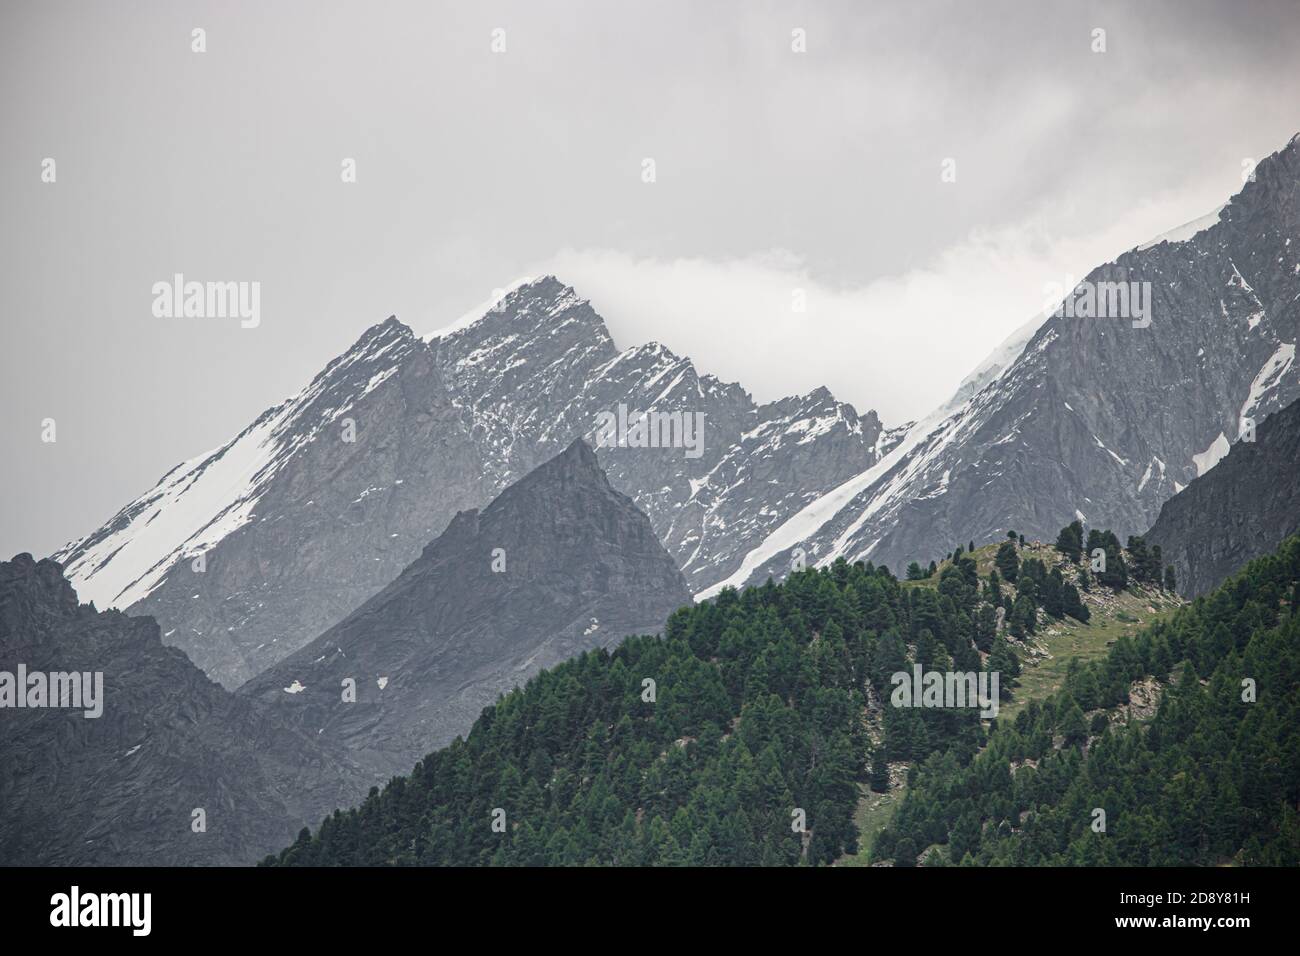 Amazing view of touristic trail near the Matterhorn in the Swiss Alps at cloudy weather Stock Photo